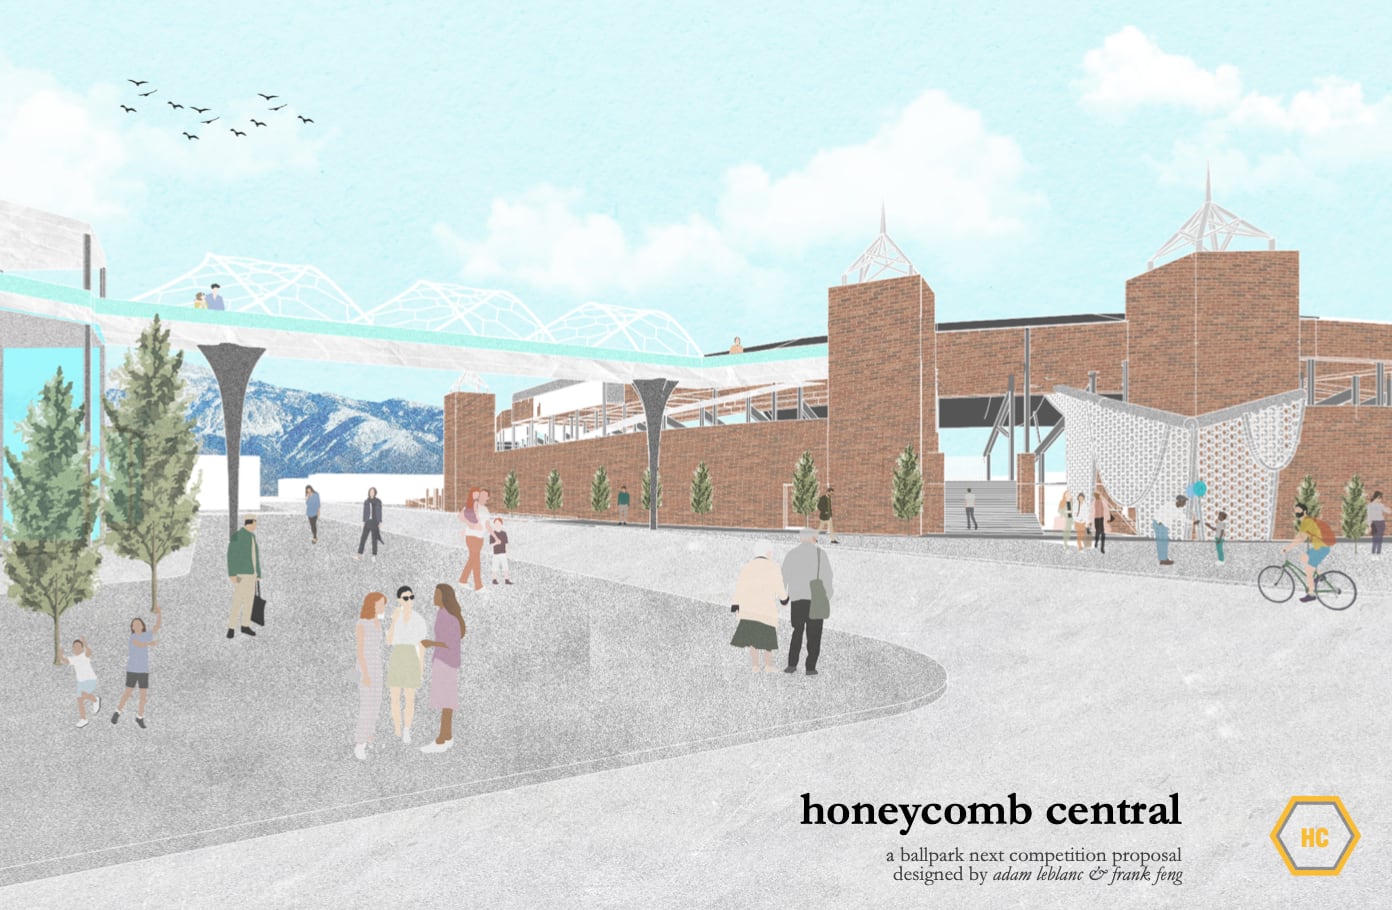 (Salt Lake City, Adam LeBlanc and Frank Feng) A rendering of Honeycomb Central, Adam LeBlanc and Frank Feng's submission to the Ballpark Next competition.